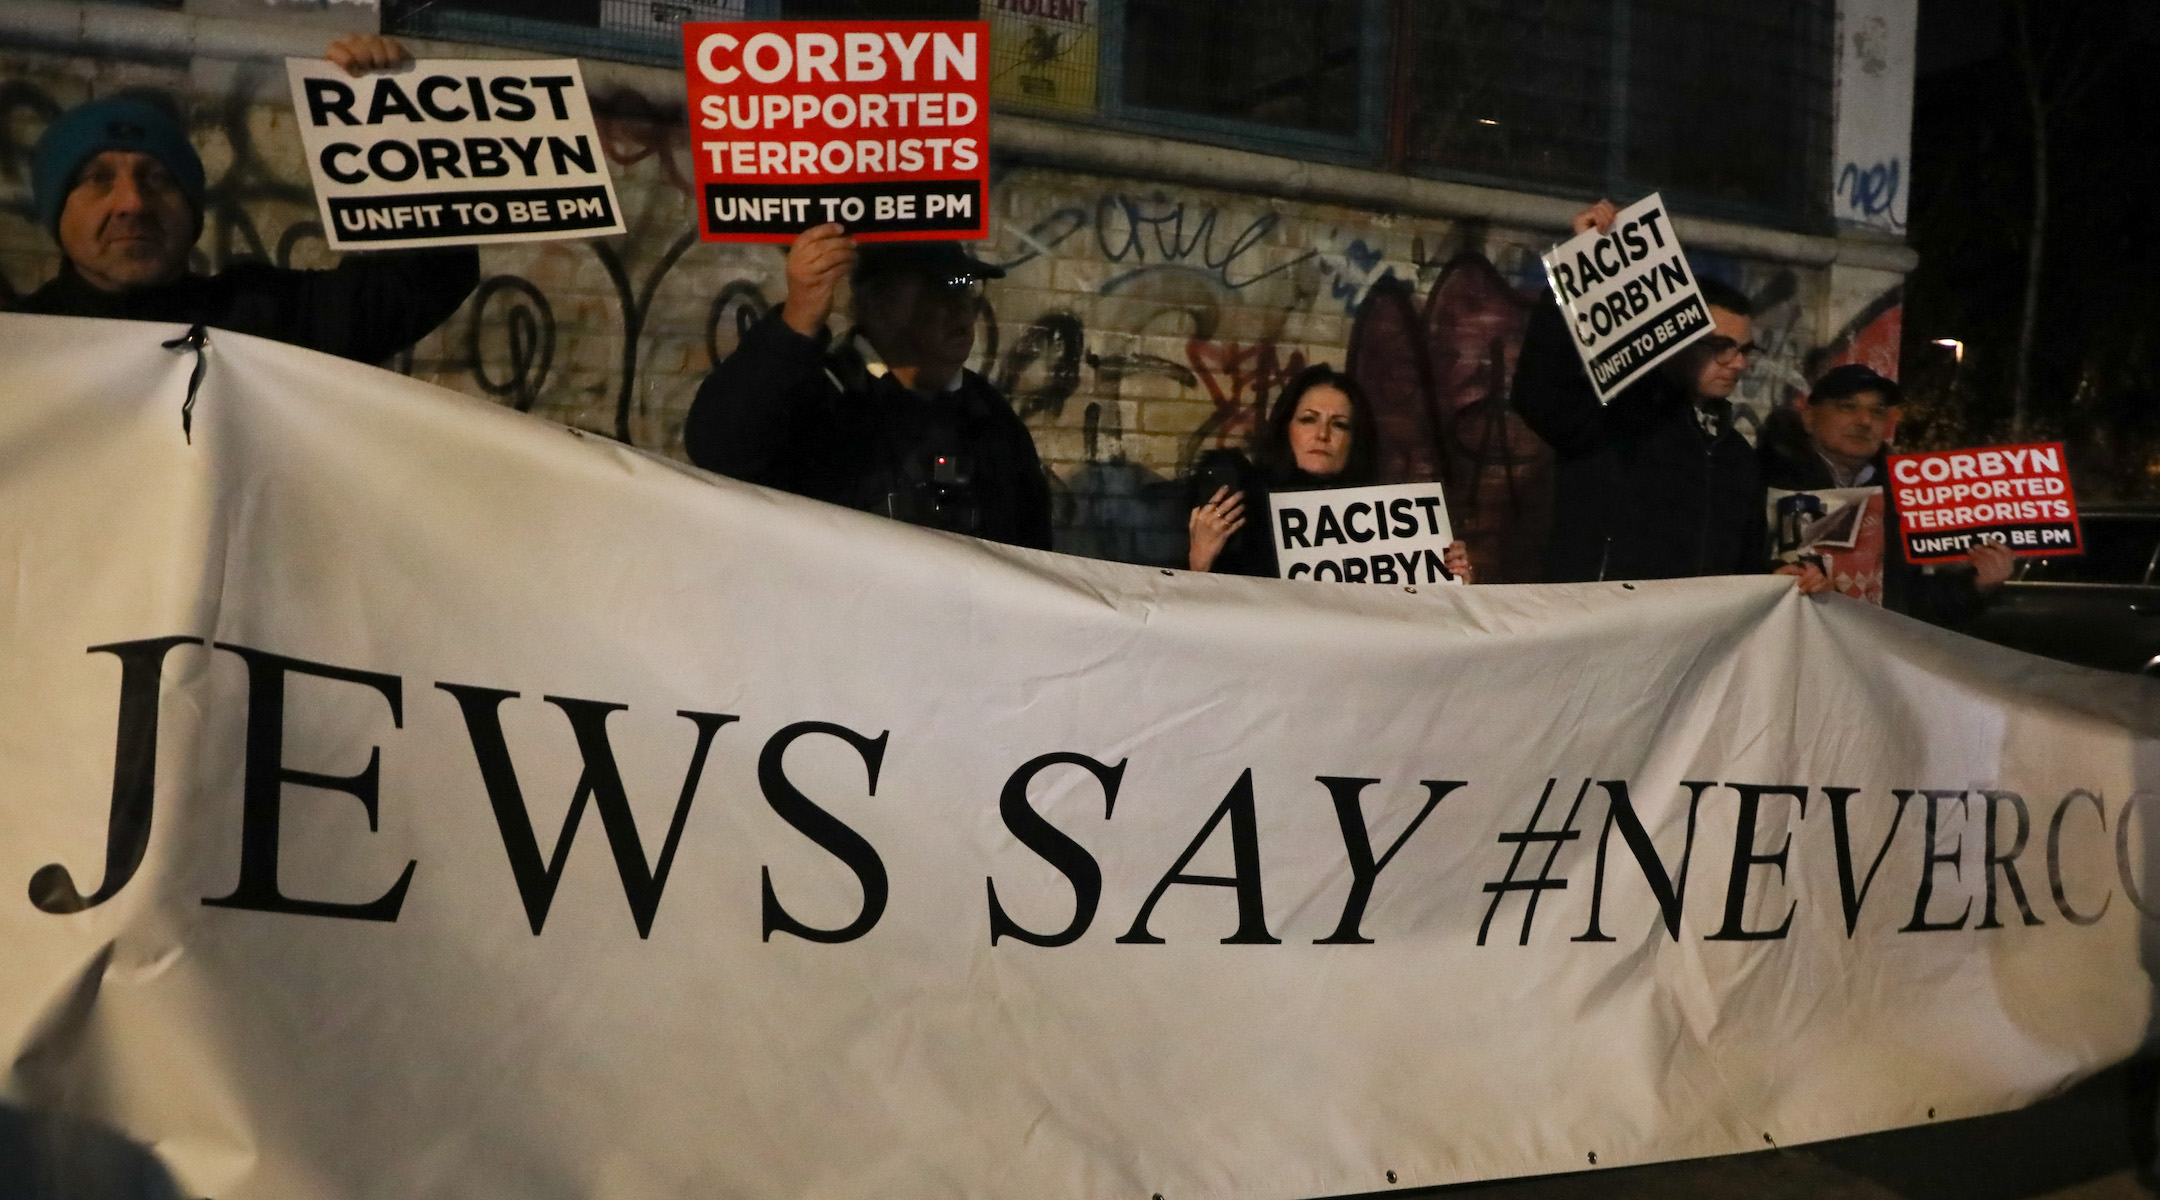 Labour Party opponents arrive at Jeremy Corbyn's final rally in Hoxton, London on December 11, 2019. (Beata Zawrzel/Getty Images)